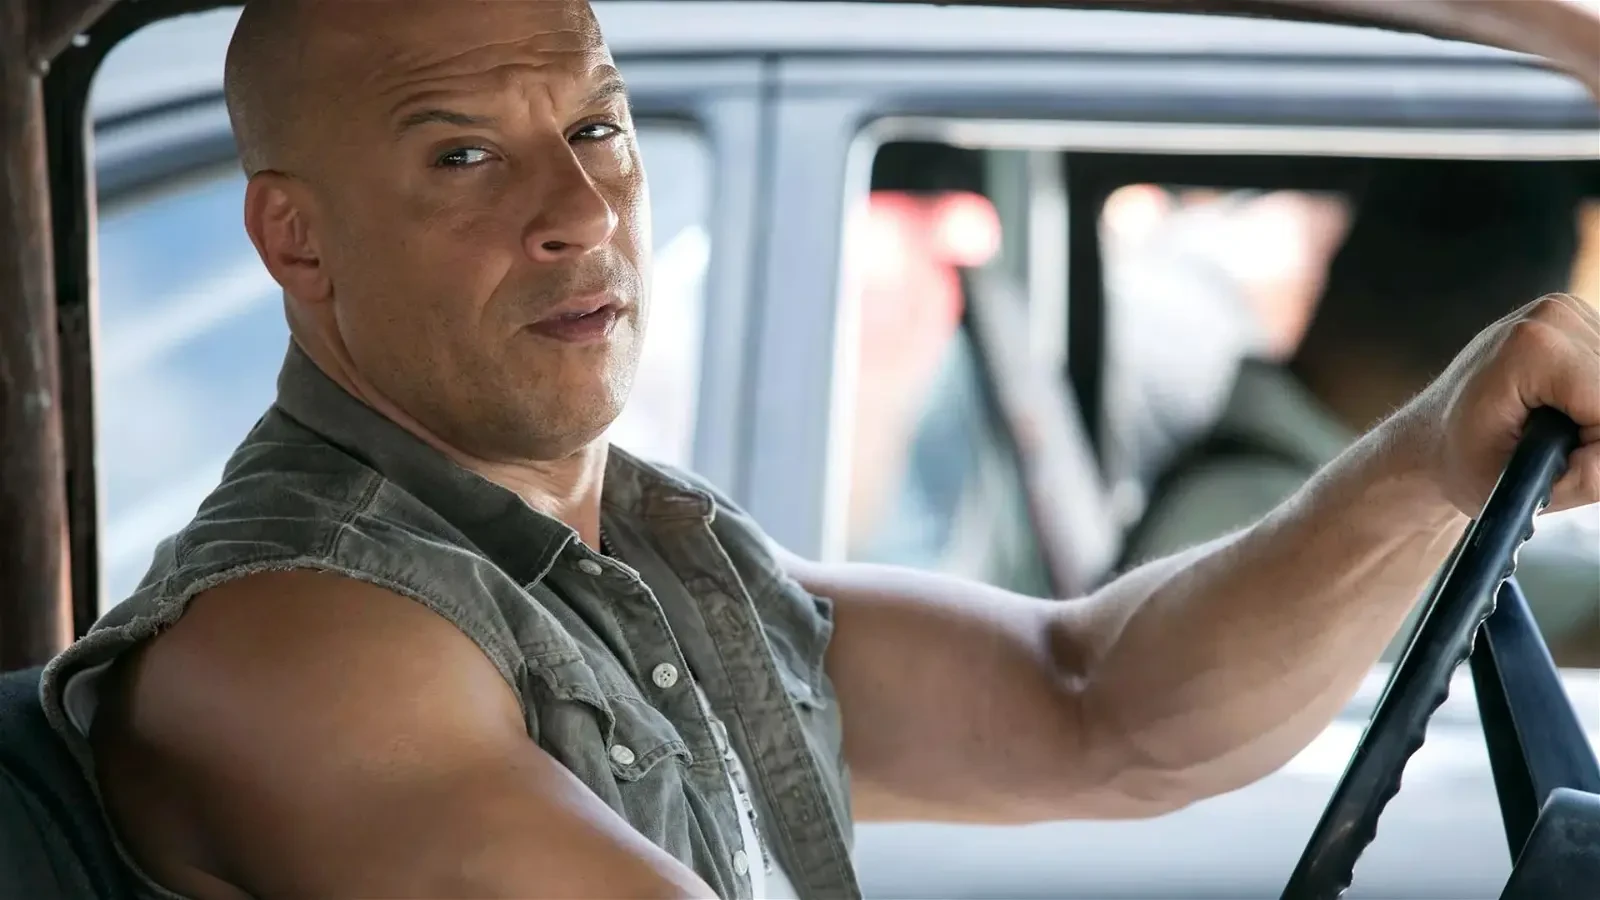 Vin Diesel in a still from the Fast and Furious franchise